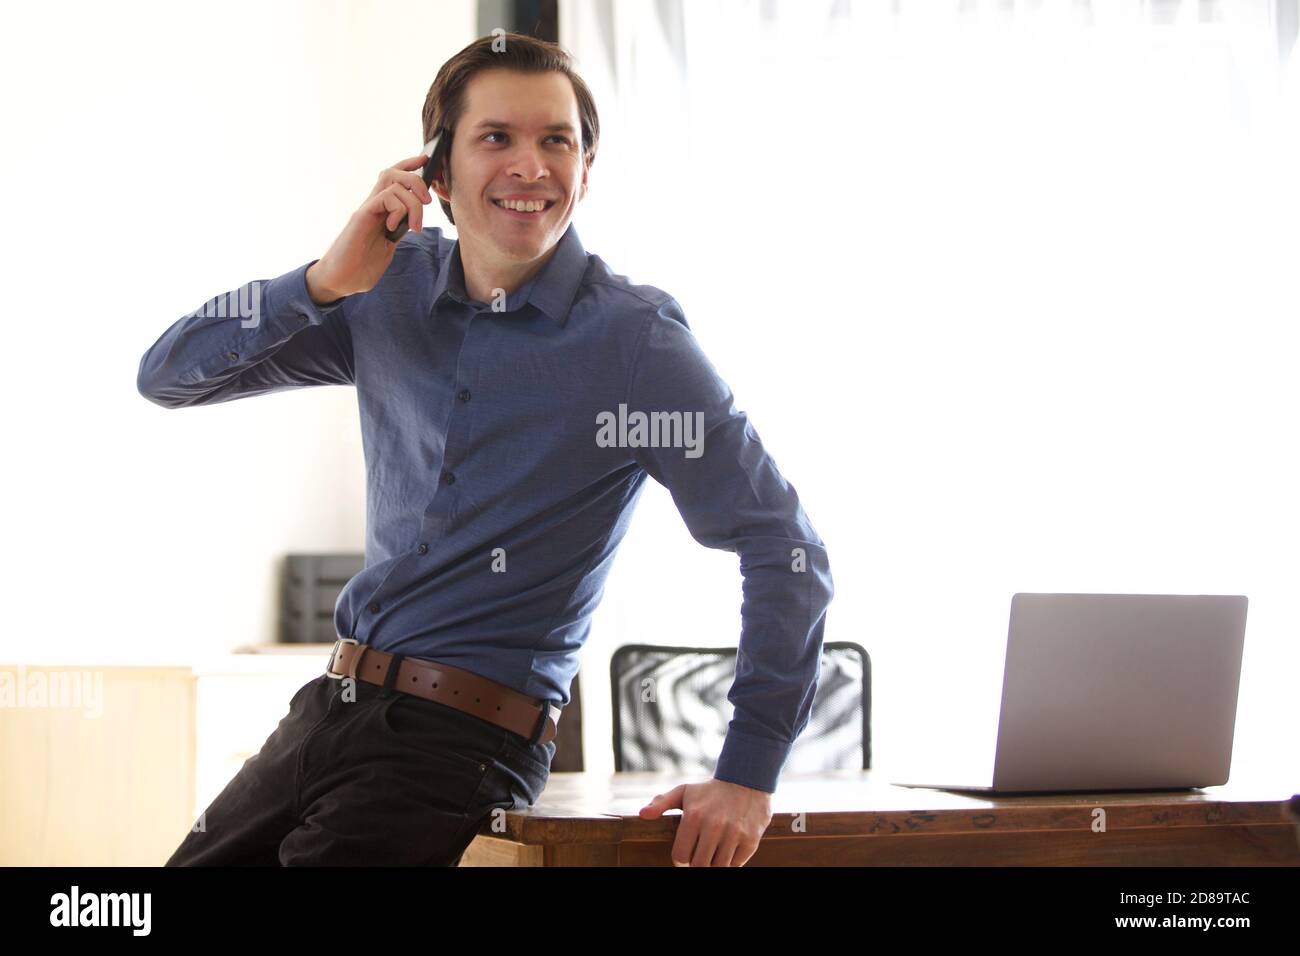 Portrait of happy businessman man on phone call leaning on desk Stock Photo